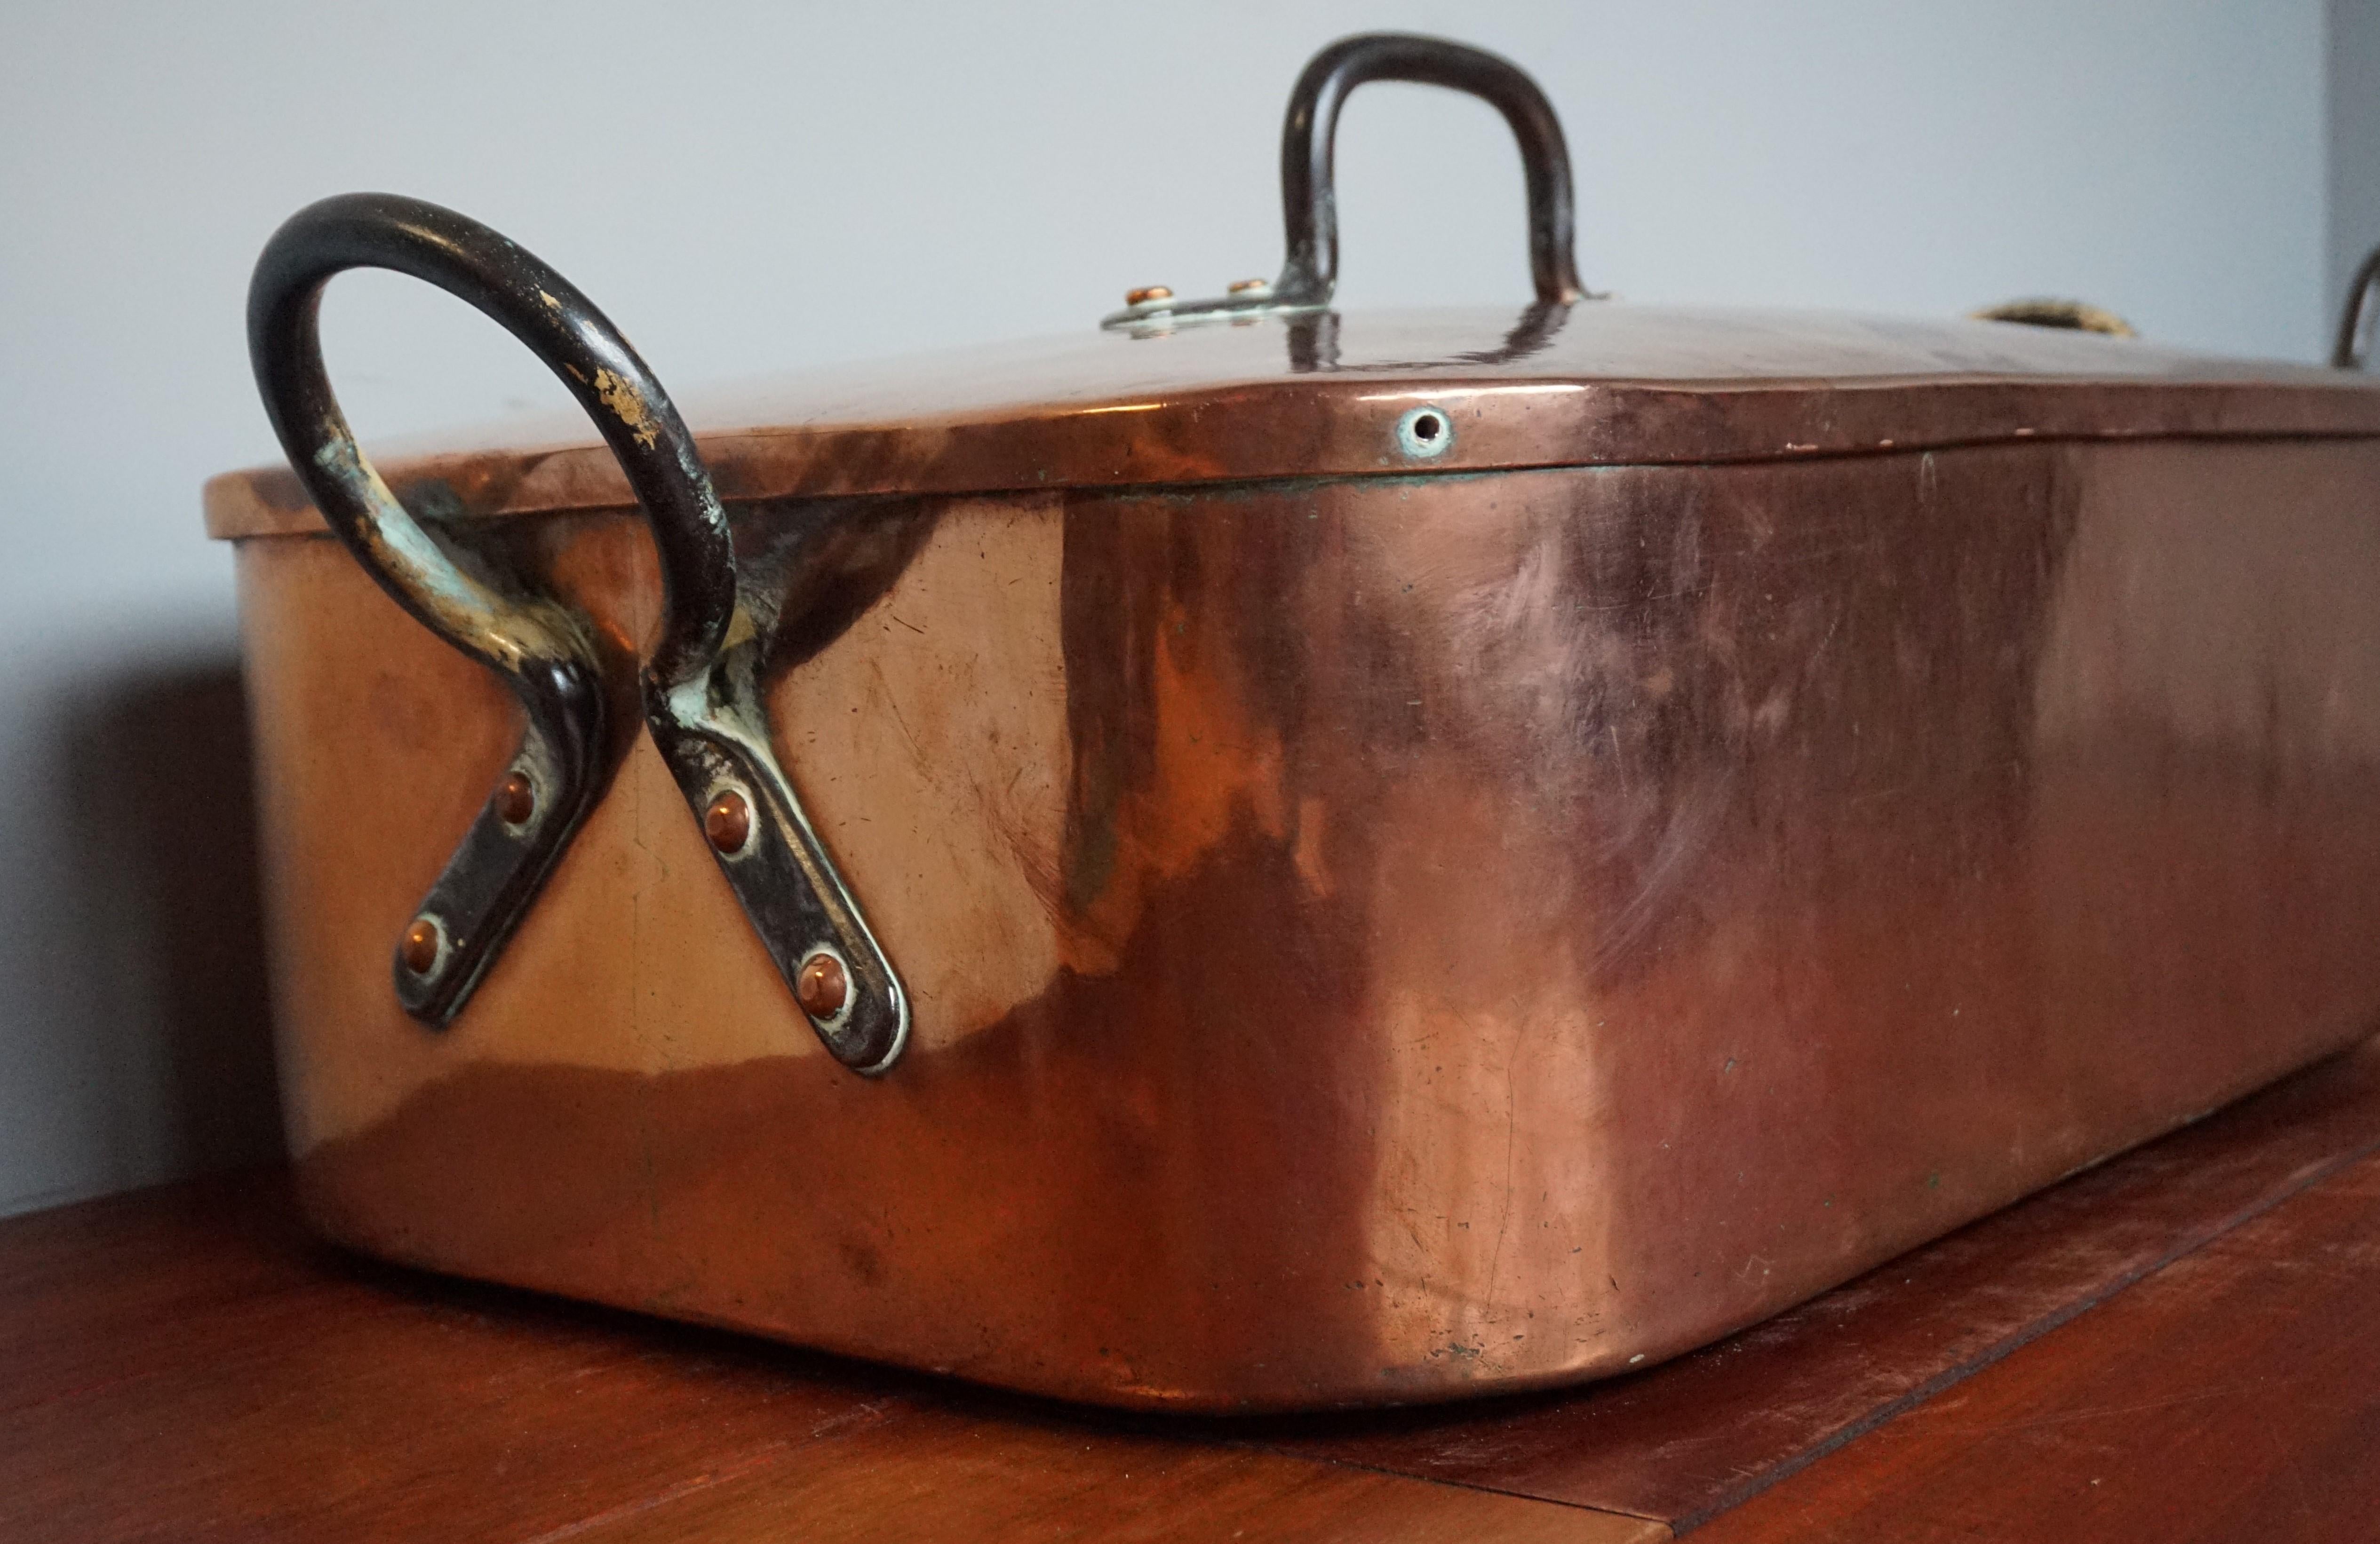 Stunning & Largest Ever Pair of Antique Copper Pans for Wild Roast in Late 1700s For Sale 1